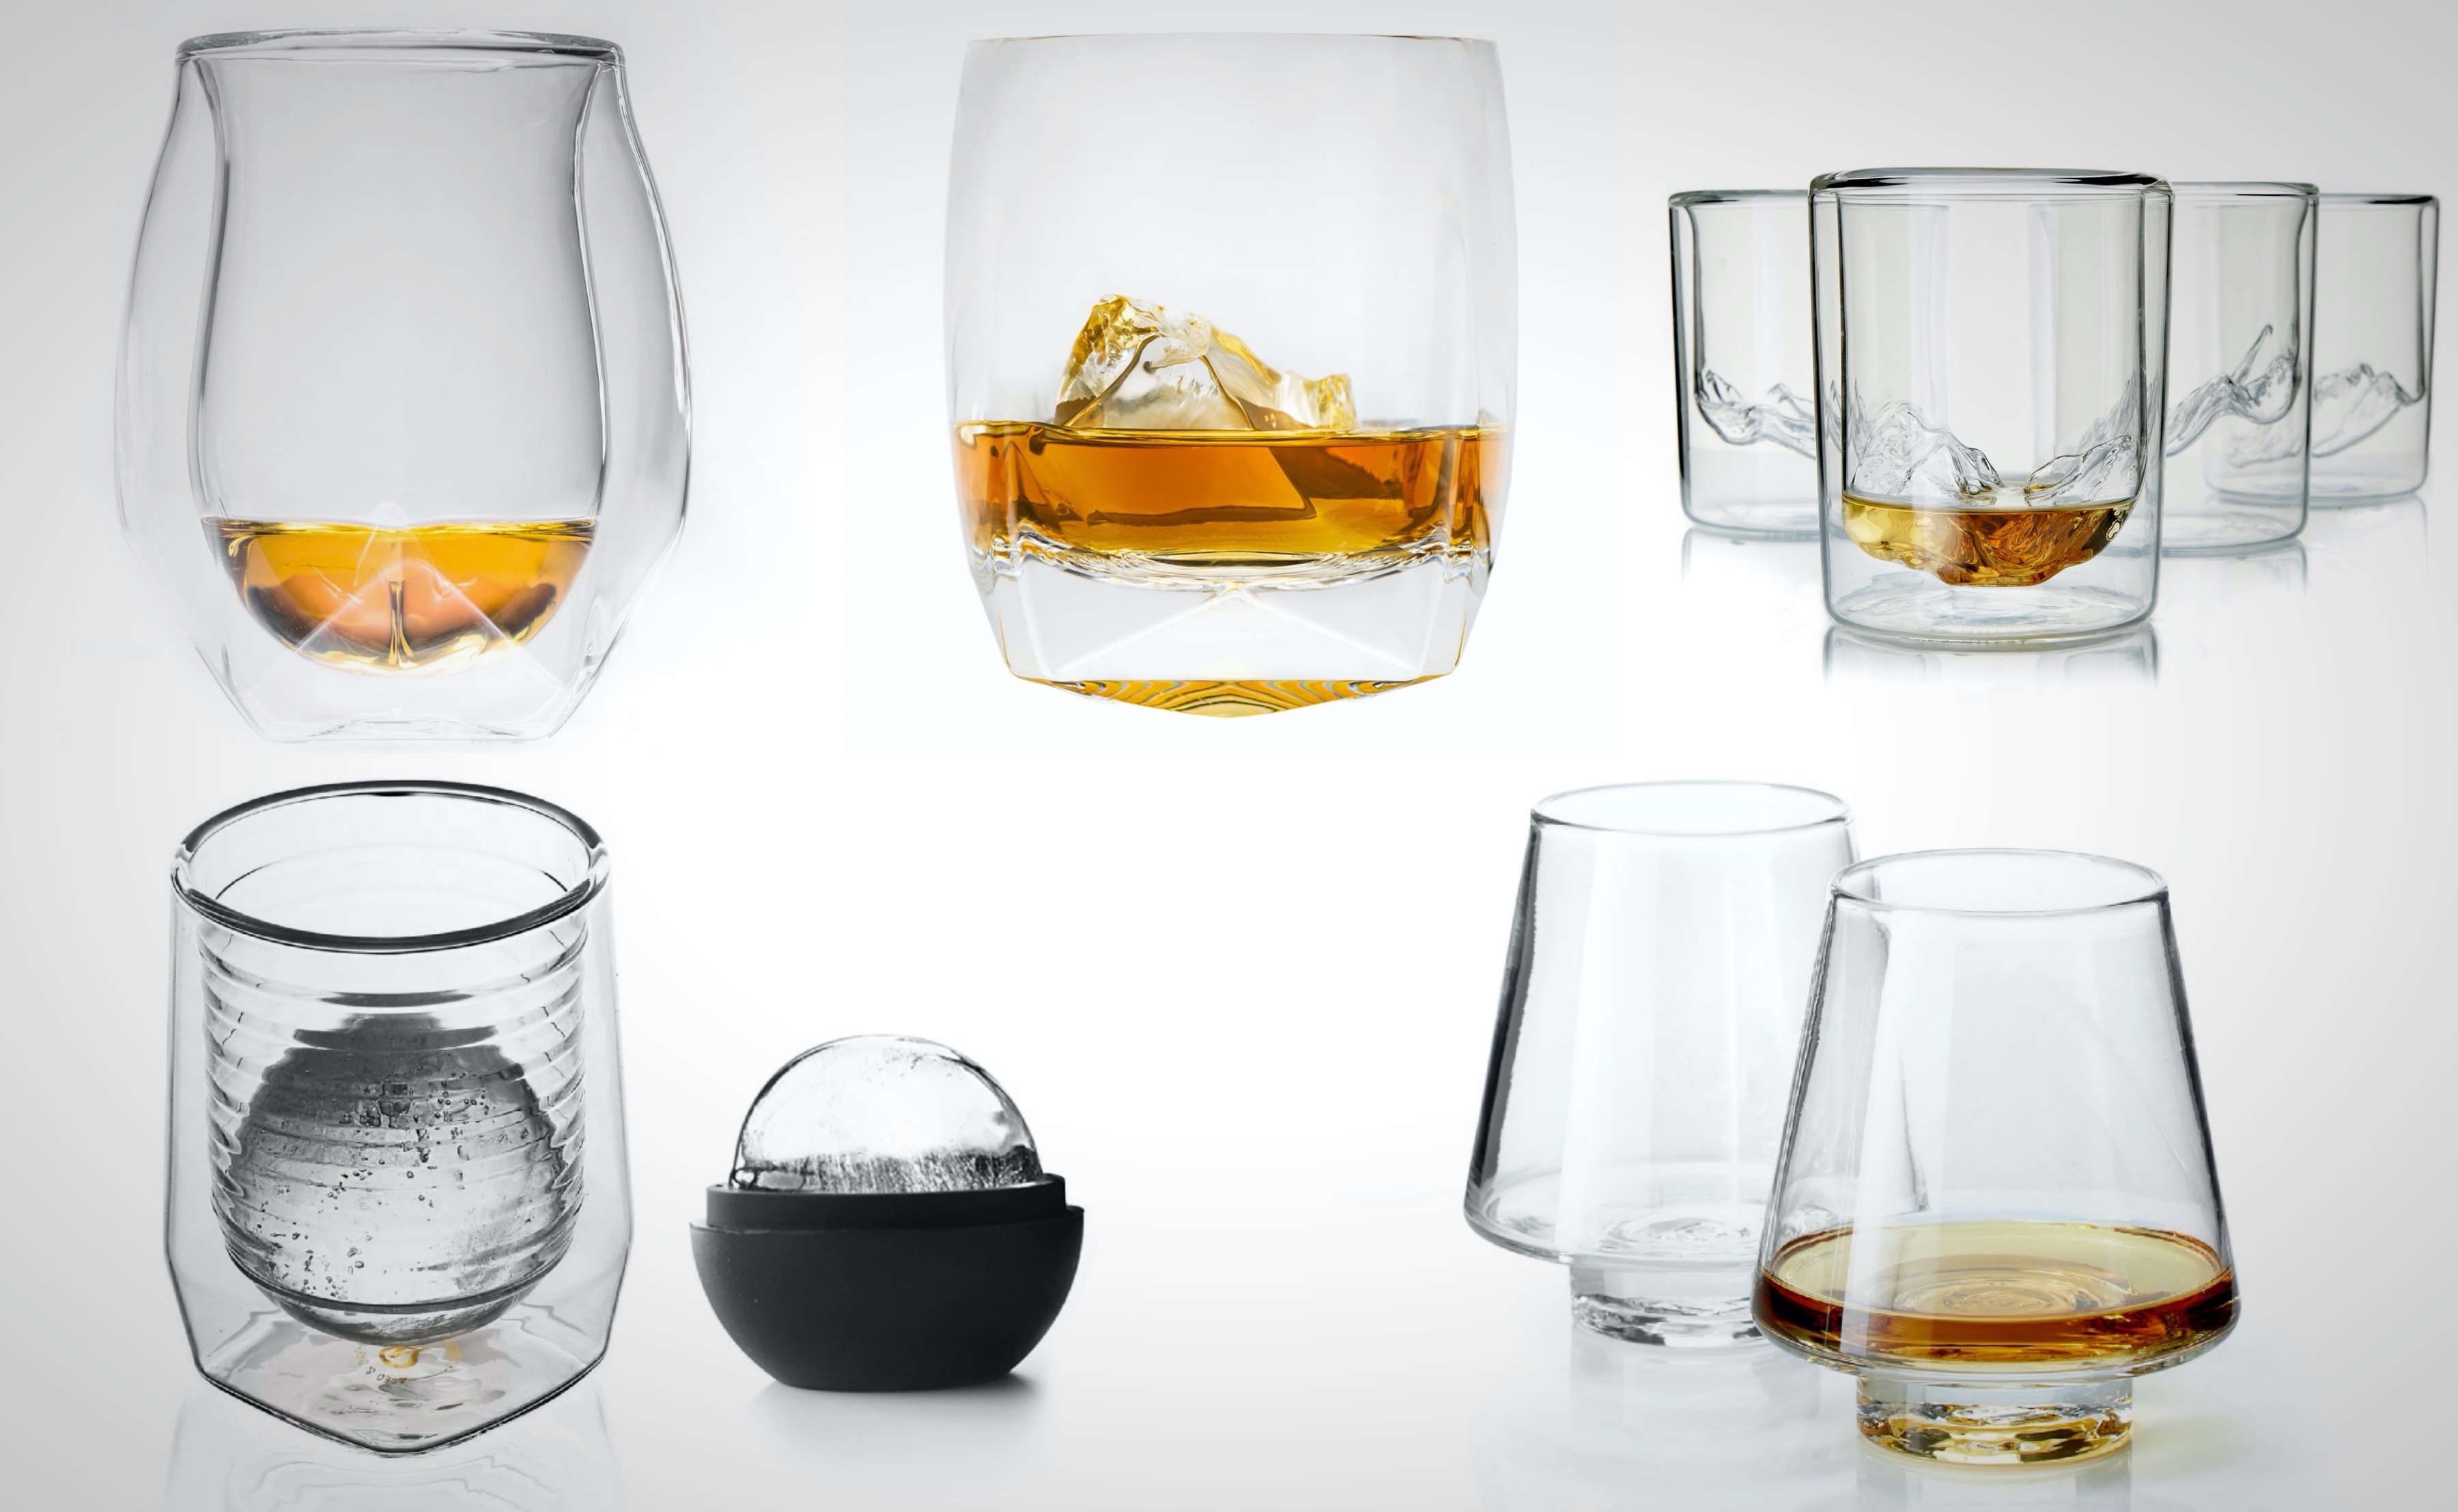 https://brobible.com/wp-content/uploads/2019/11/best-whiskey-glasses-for-whisky-scotch-bourbon.jpg